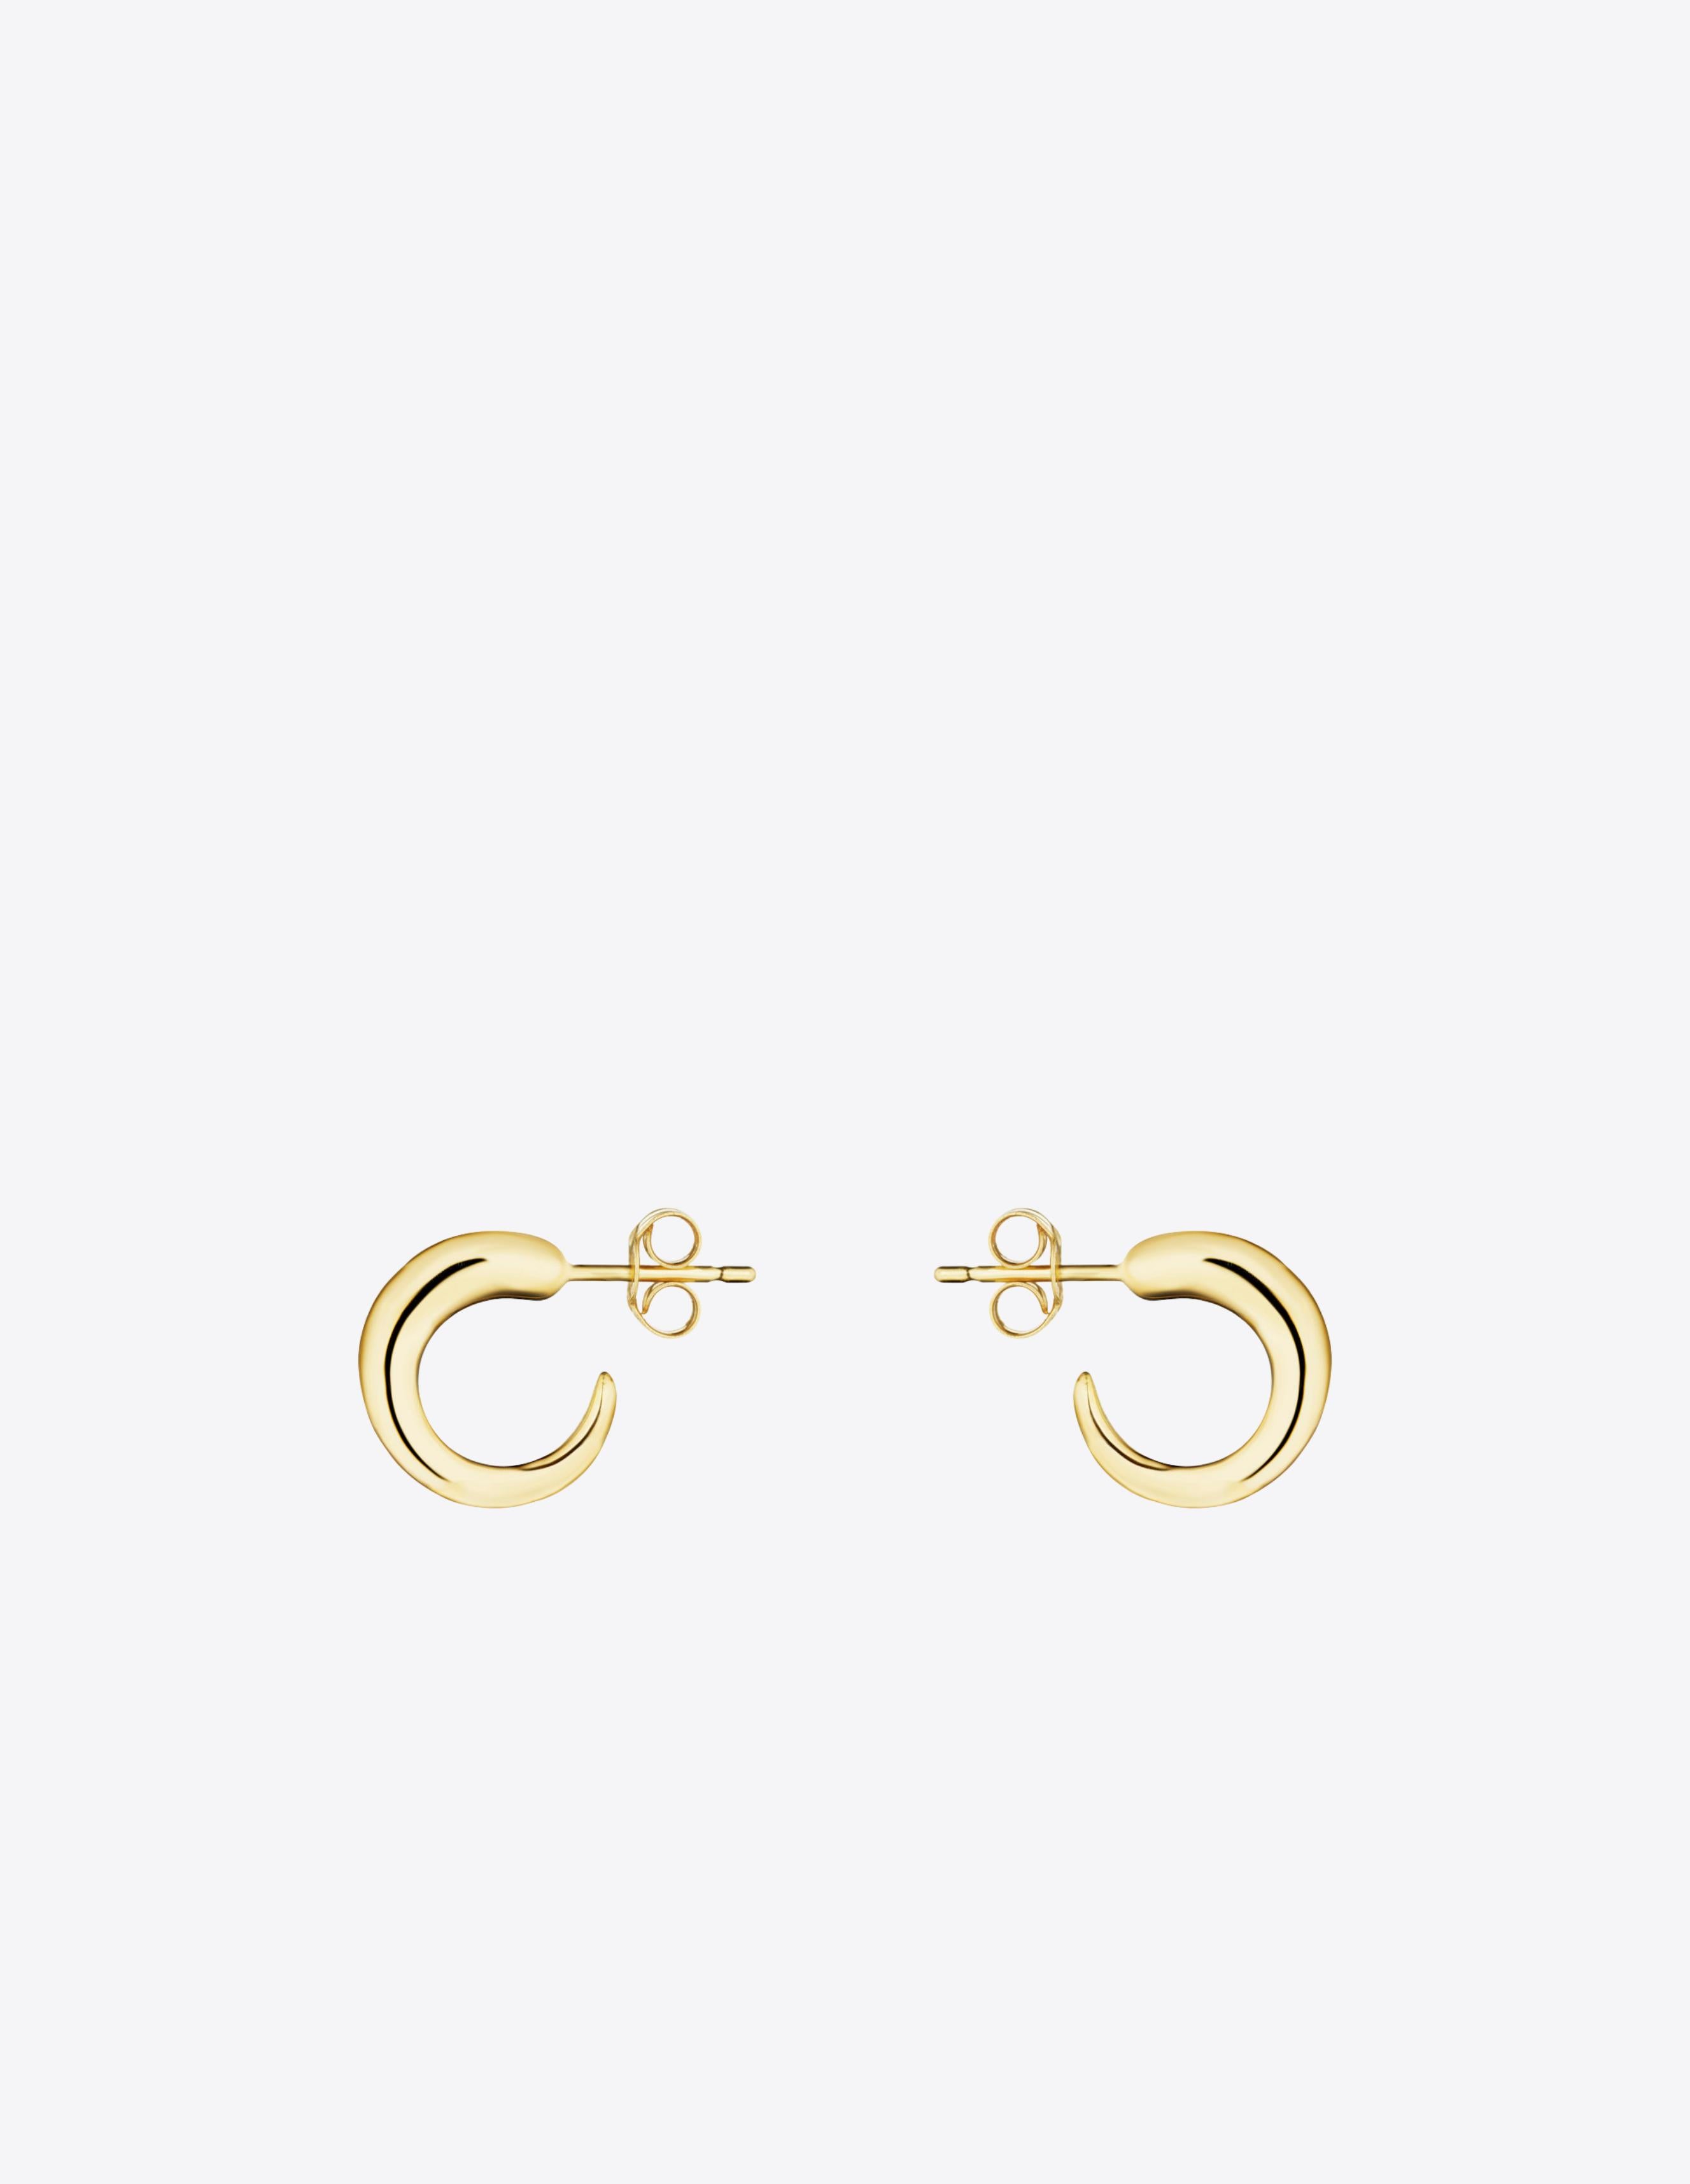 Tiny Khartoum Hoops Nude in 18K Gold In New Condition For Sale In Brooklyn, NY